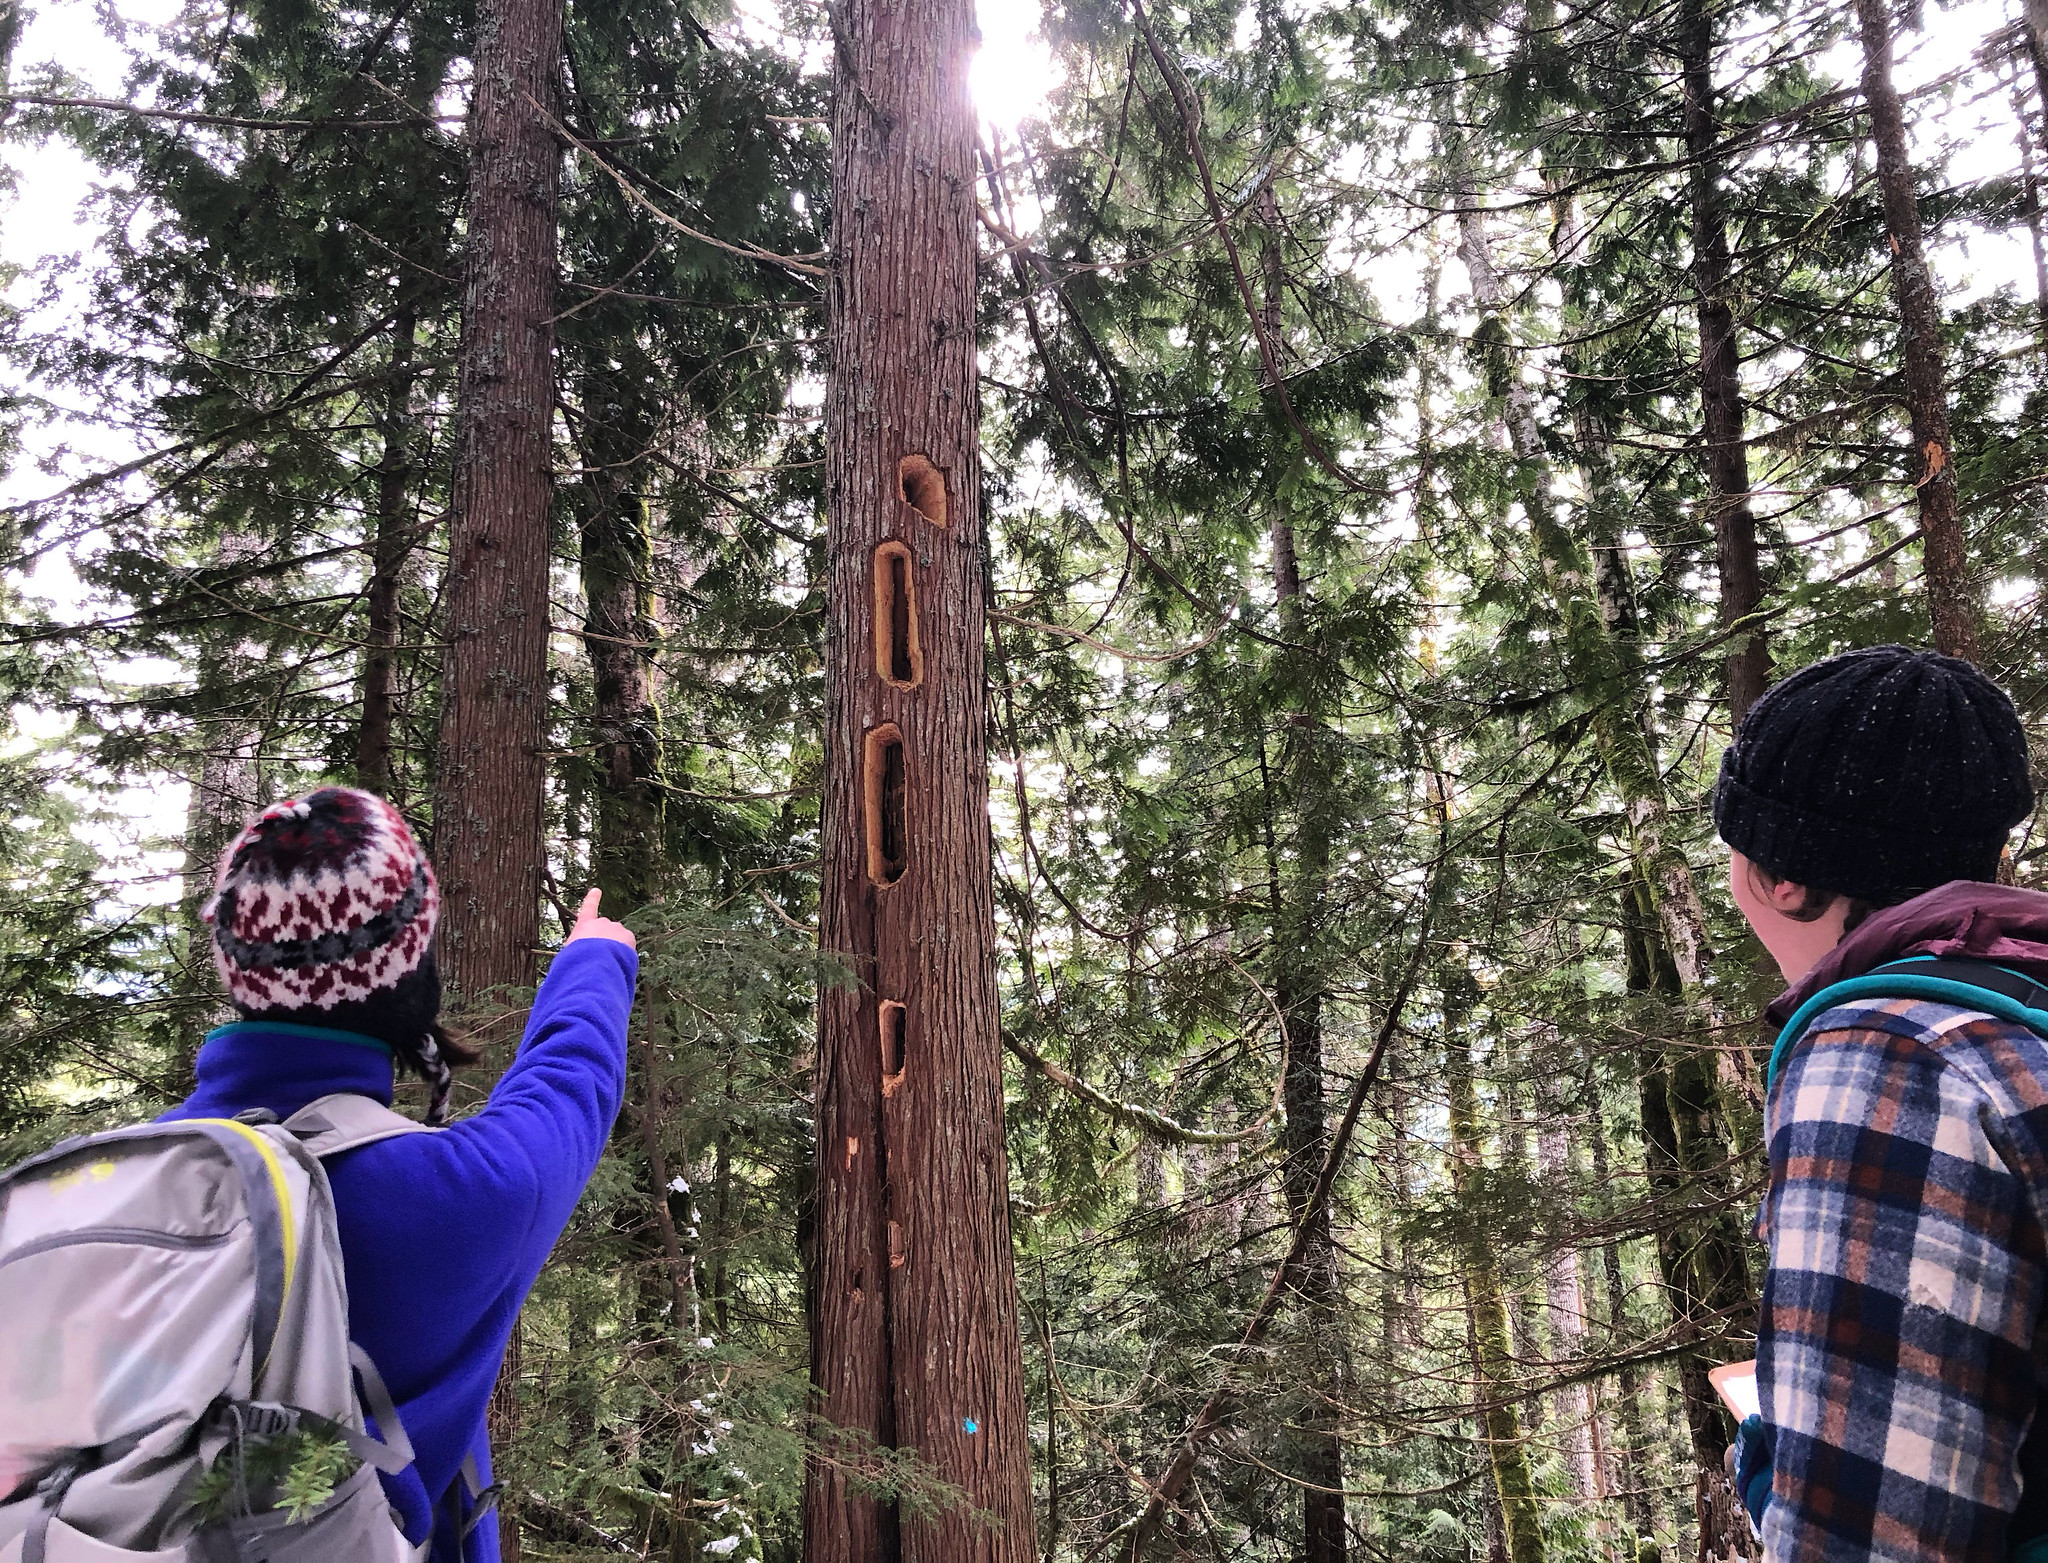 Two people, in the forest in winter clothing pointing at fir trees that have been excavated by pileated woodpeckers.